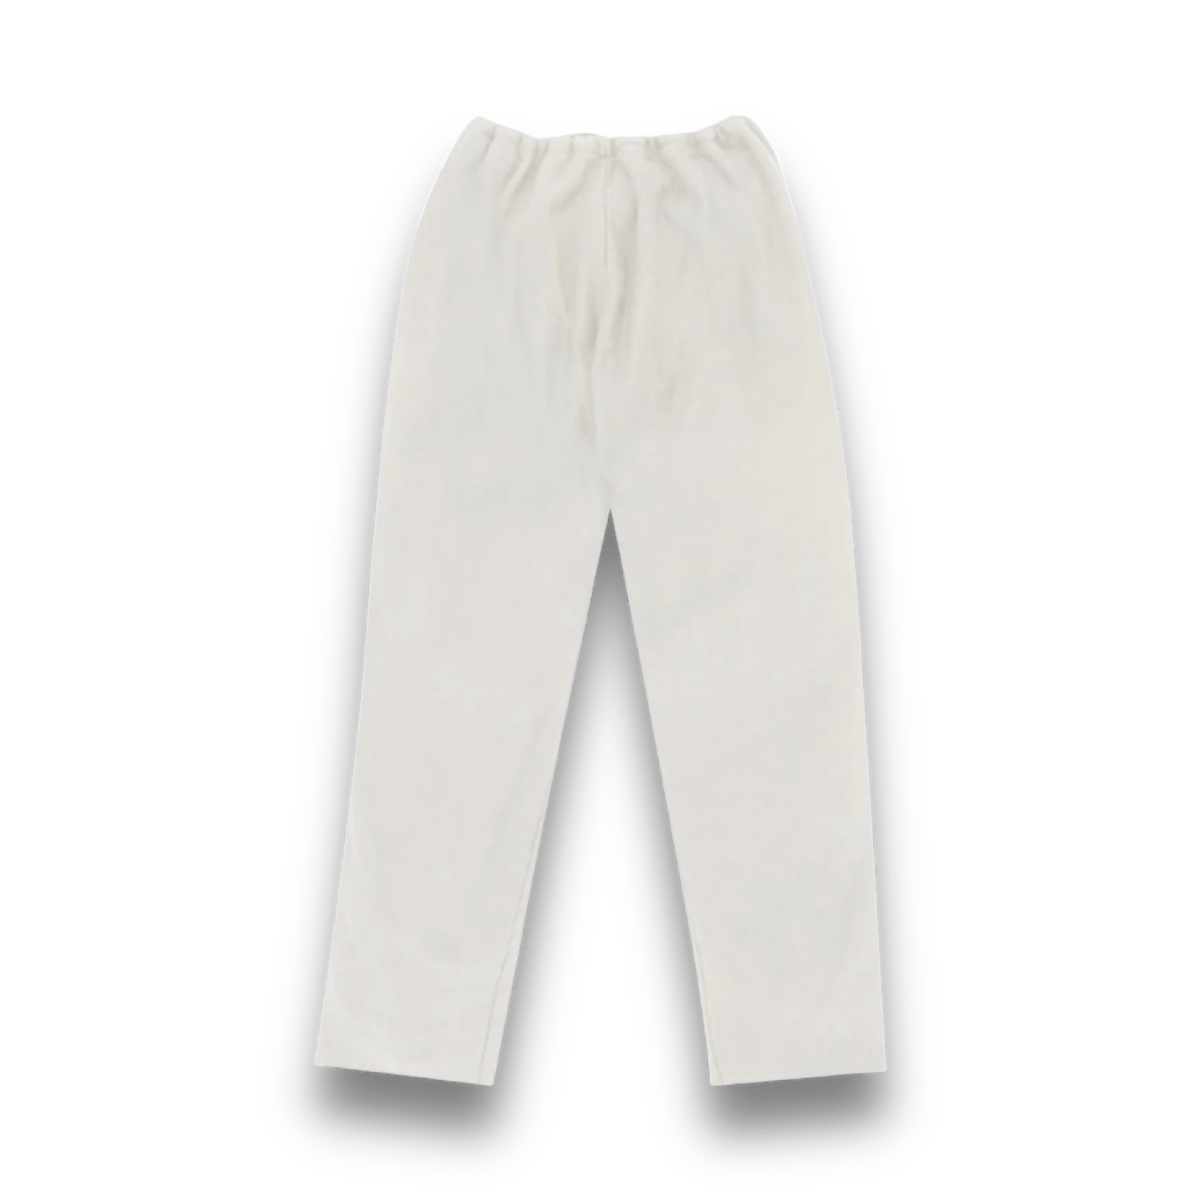 Yeezy YZY Gosha Vultures Pant - White - Bottoms - Jawns on Fire Sneakers & Streetwear